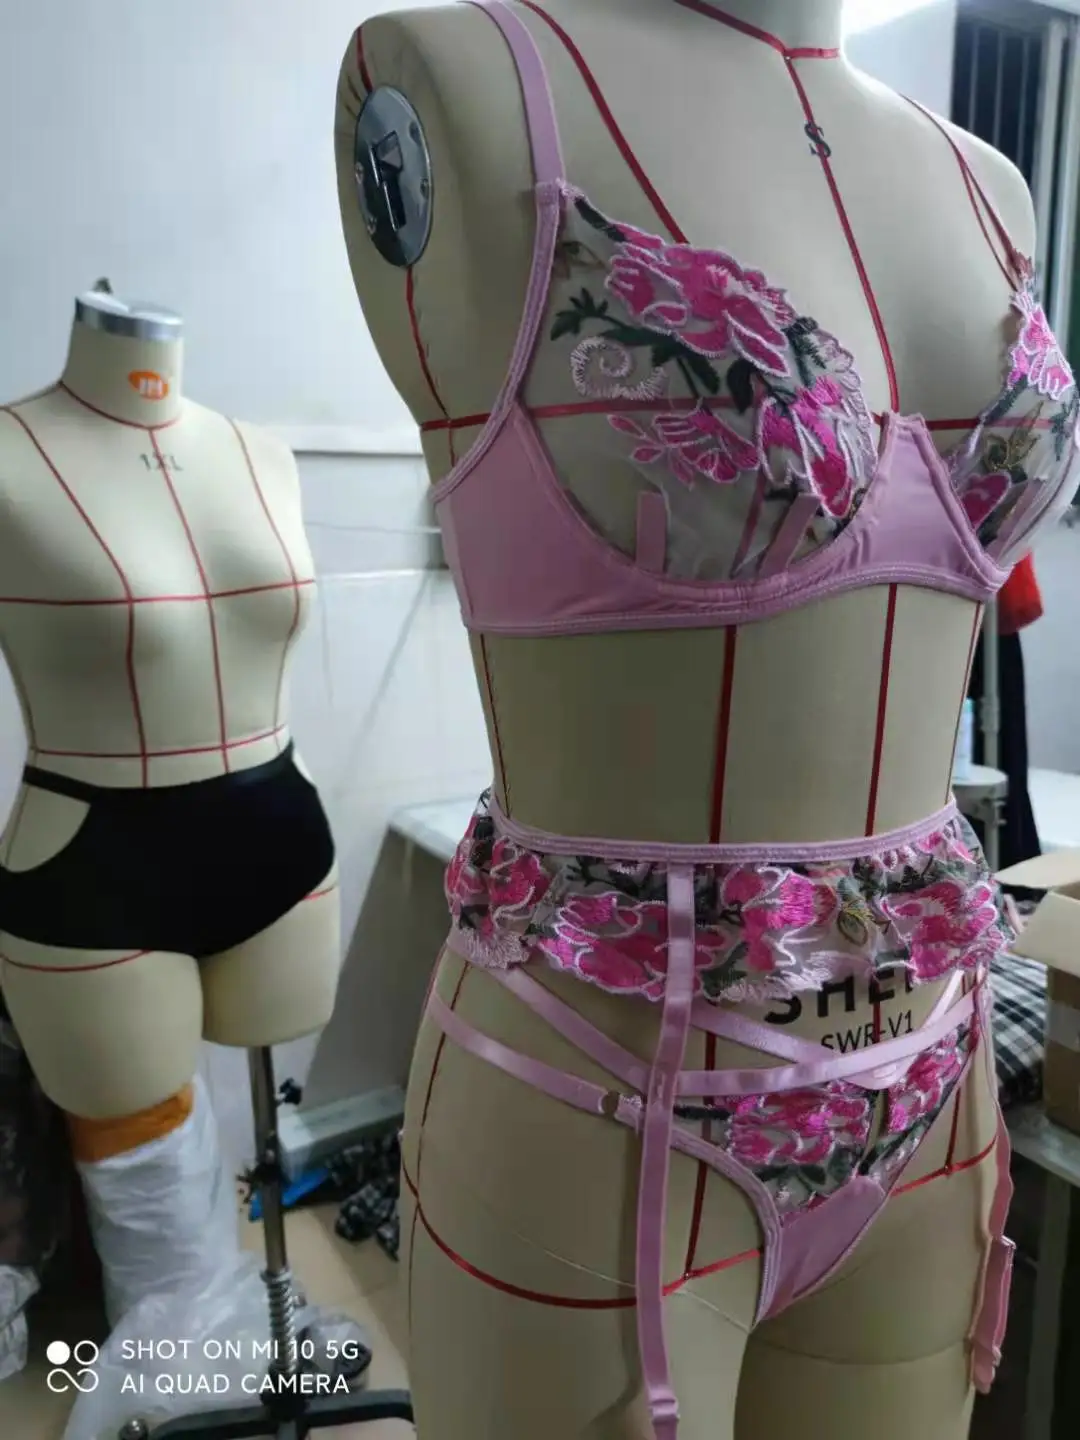 Women's Embroidery Lingerie